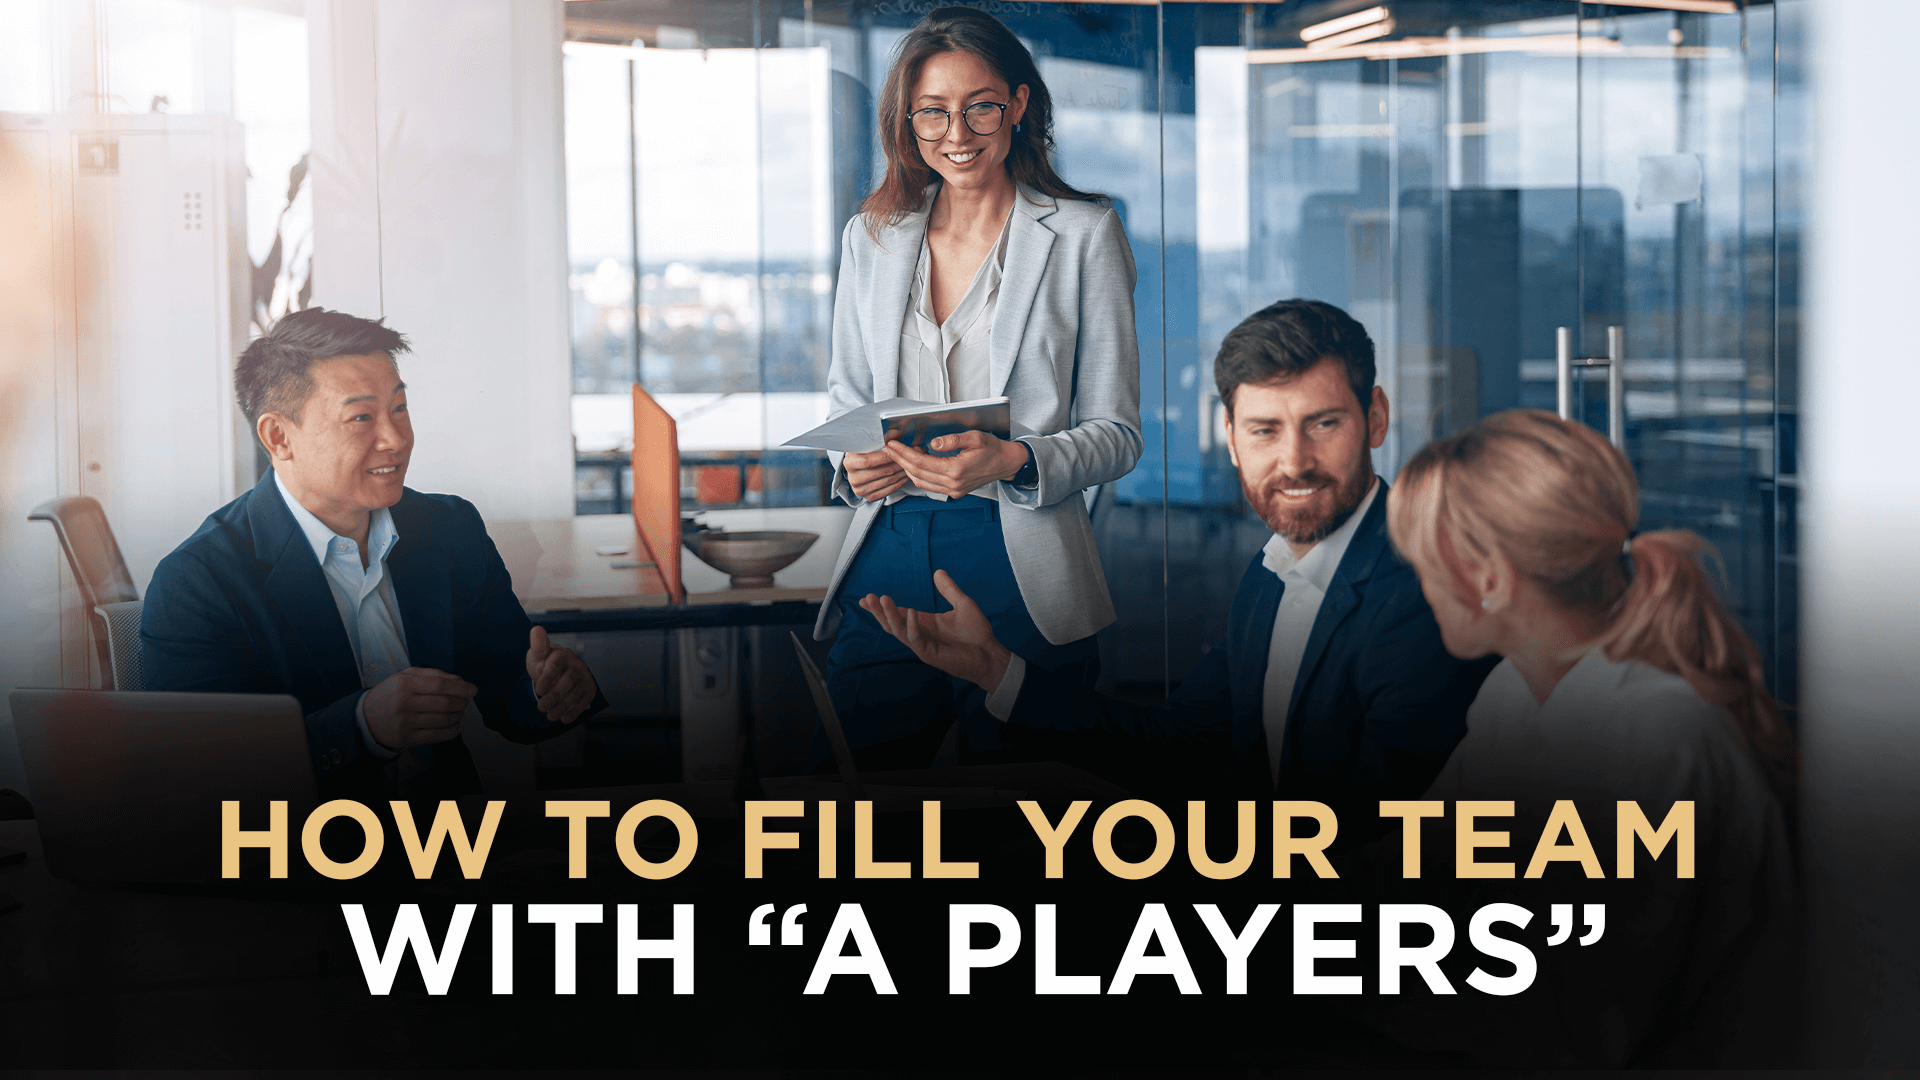 How to fill your team with “A players”